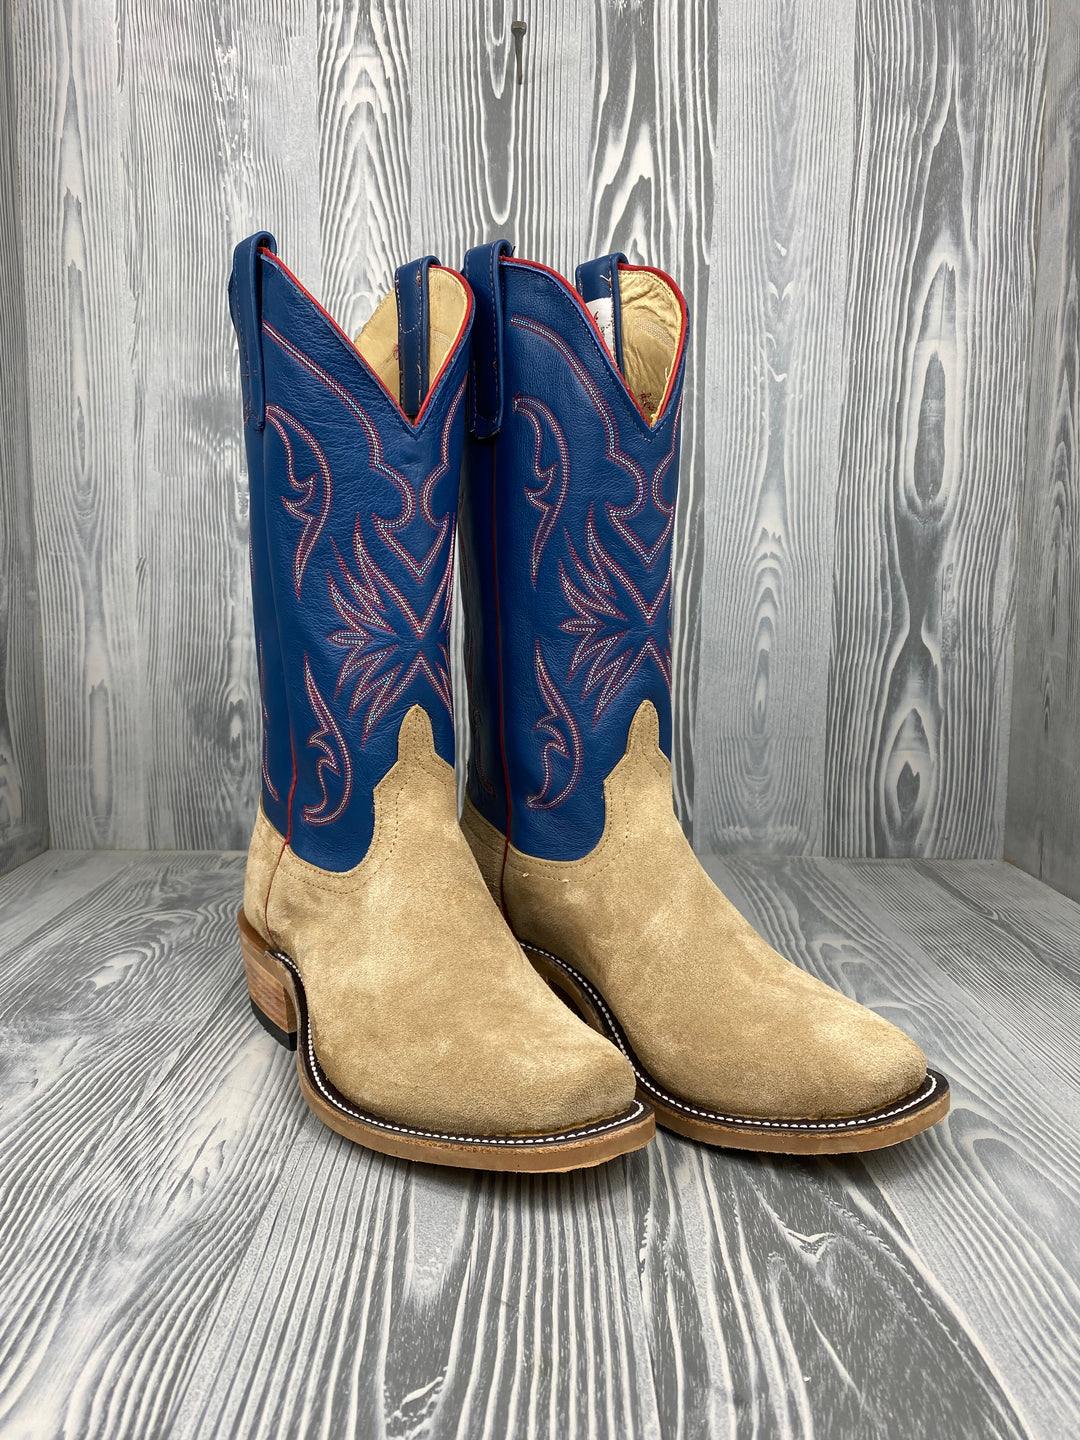 Men's Anderson Bean Tan Crazy Horse Reversed with 13" Striking Blue Deercow Tops